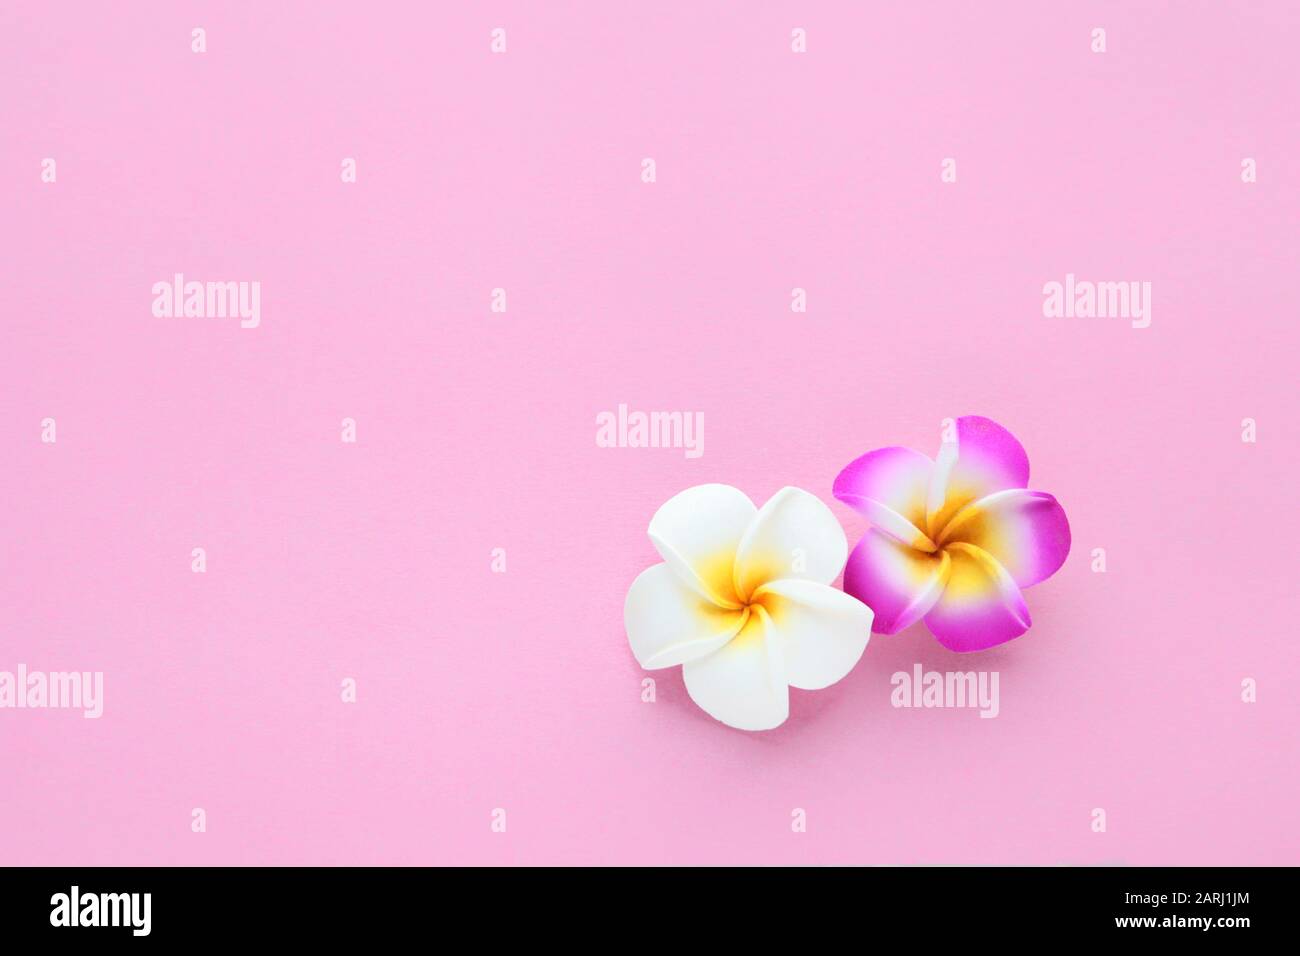 tropical flowers seamless plain background with white and pink frangipani flower, floral texture for wallpaper or backdrop. spring floral concept Stock Photo